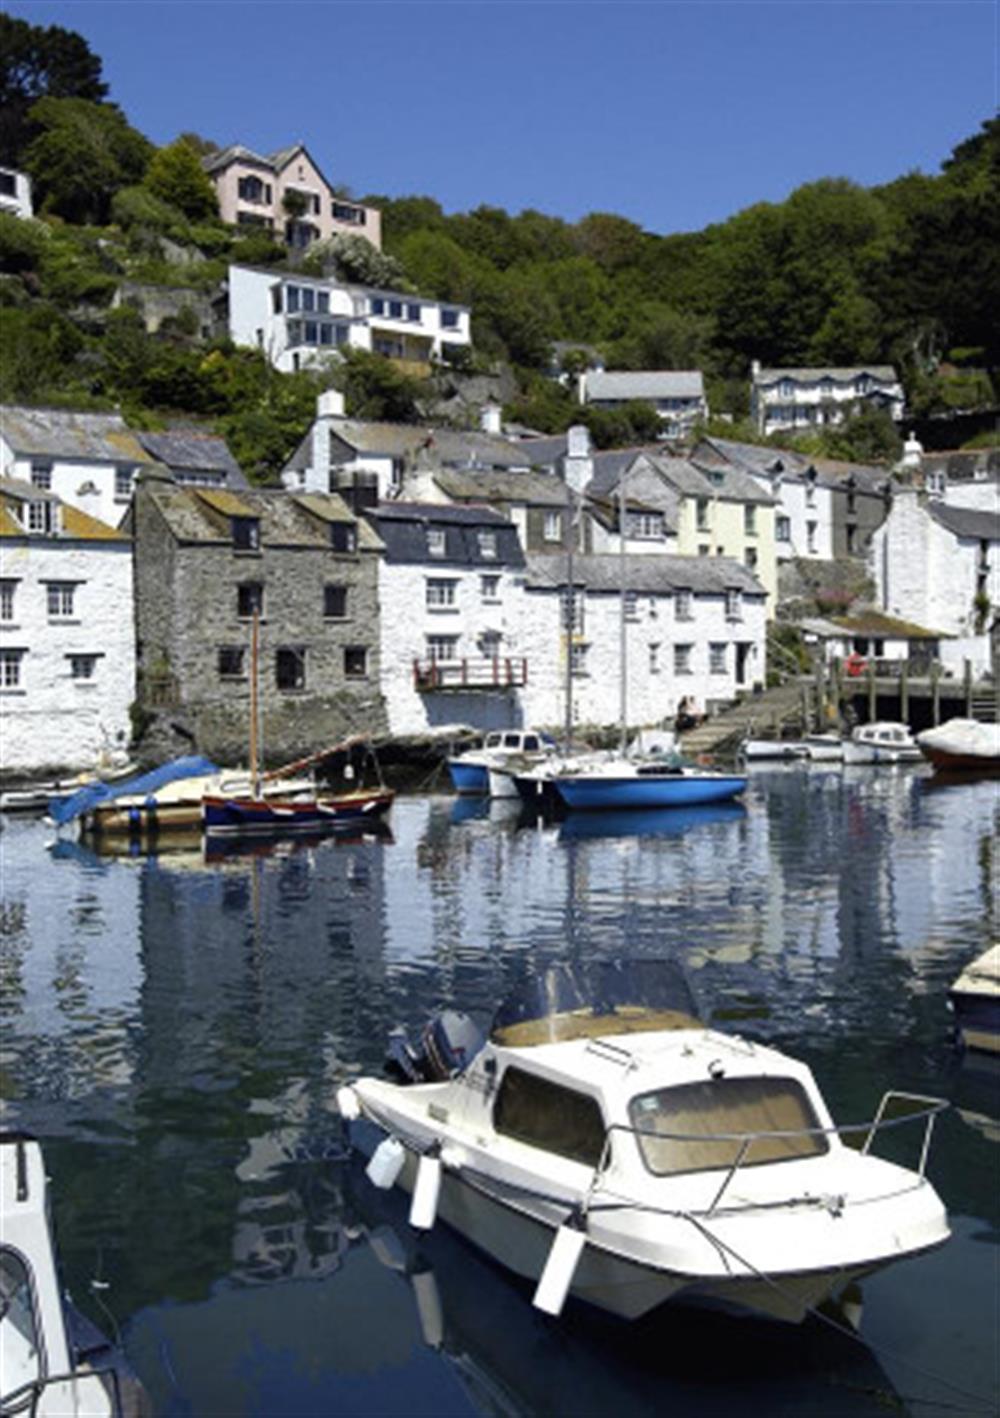 The Polperro harbour at Penny Cottage in Polperro